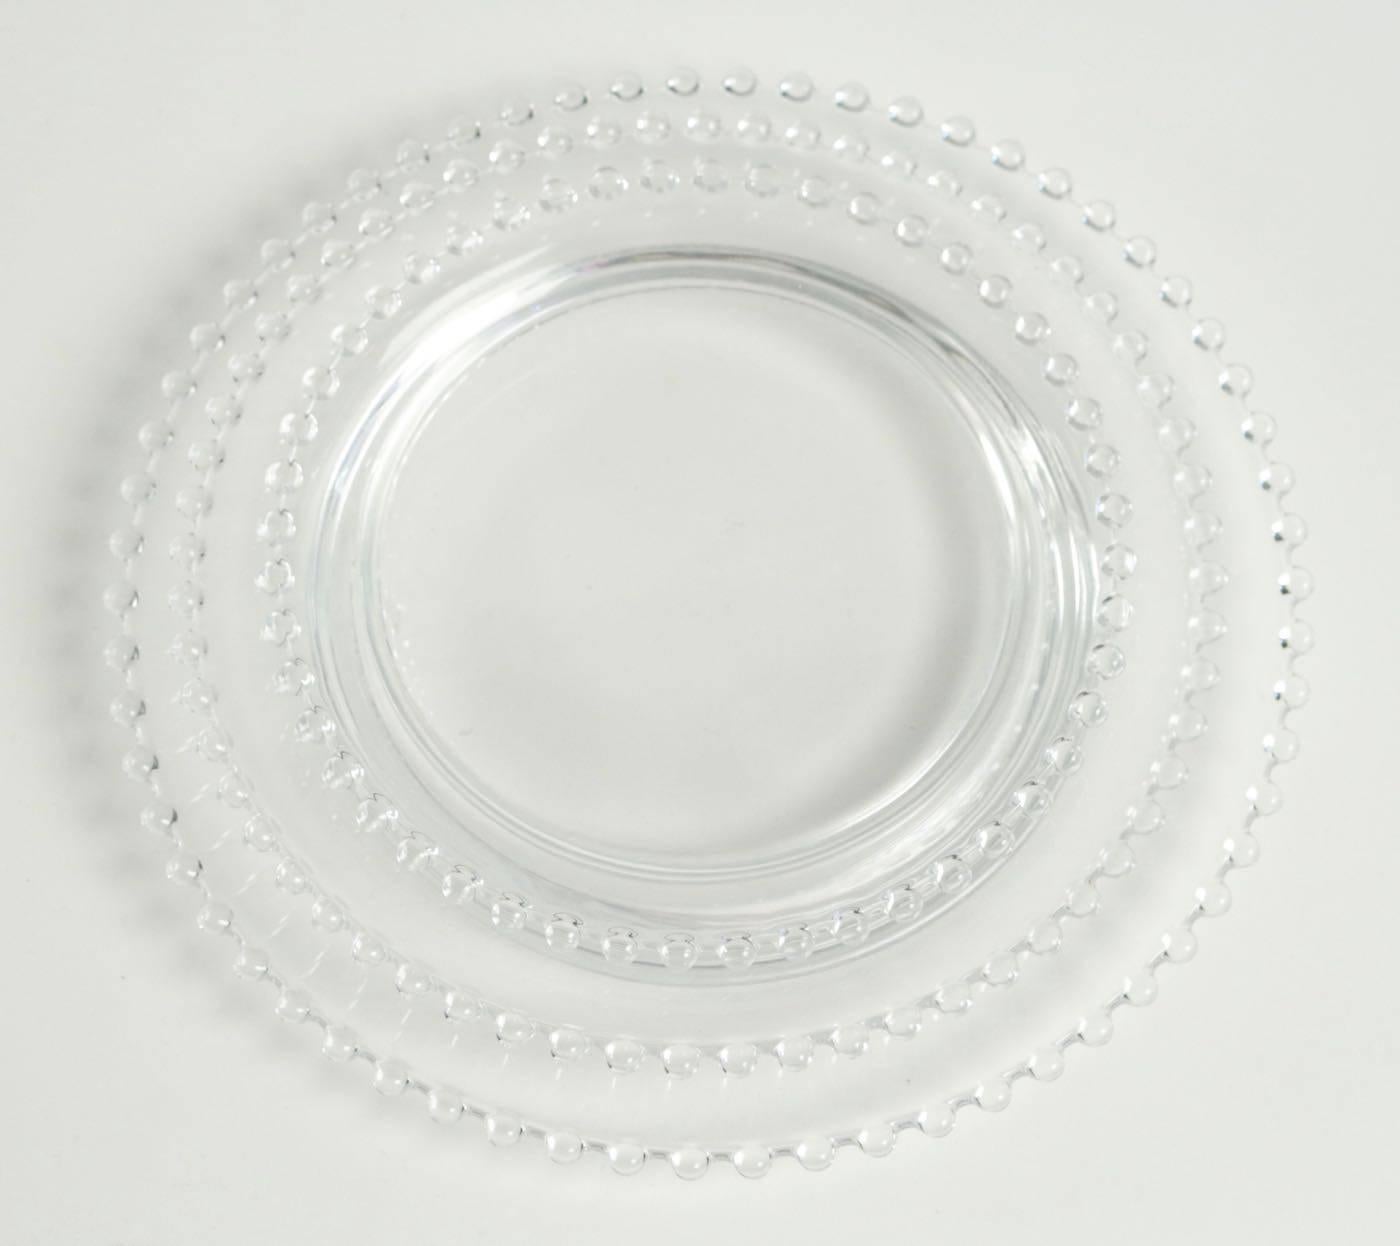 Rene Lalique a set of 38 clear glass round with high relief pearl type bead decorations molded all around the exterior rim 
13 larges plates: 30 cm 
11 plates: 25 cm
15 lunch plates: 21 cm
 Clear incorporating molded small beads all around the